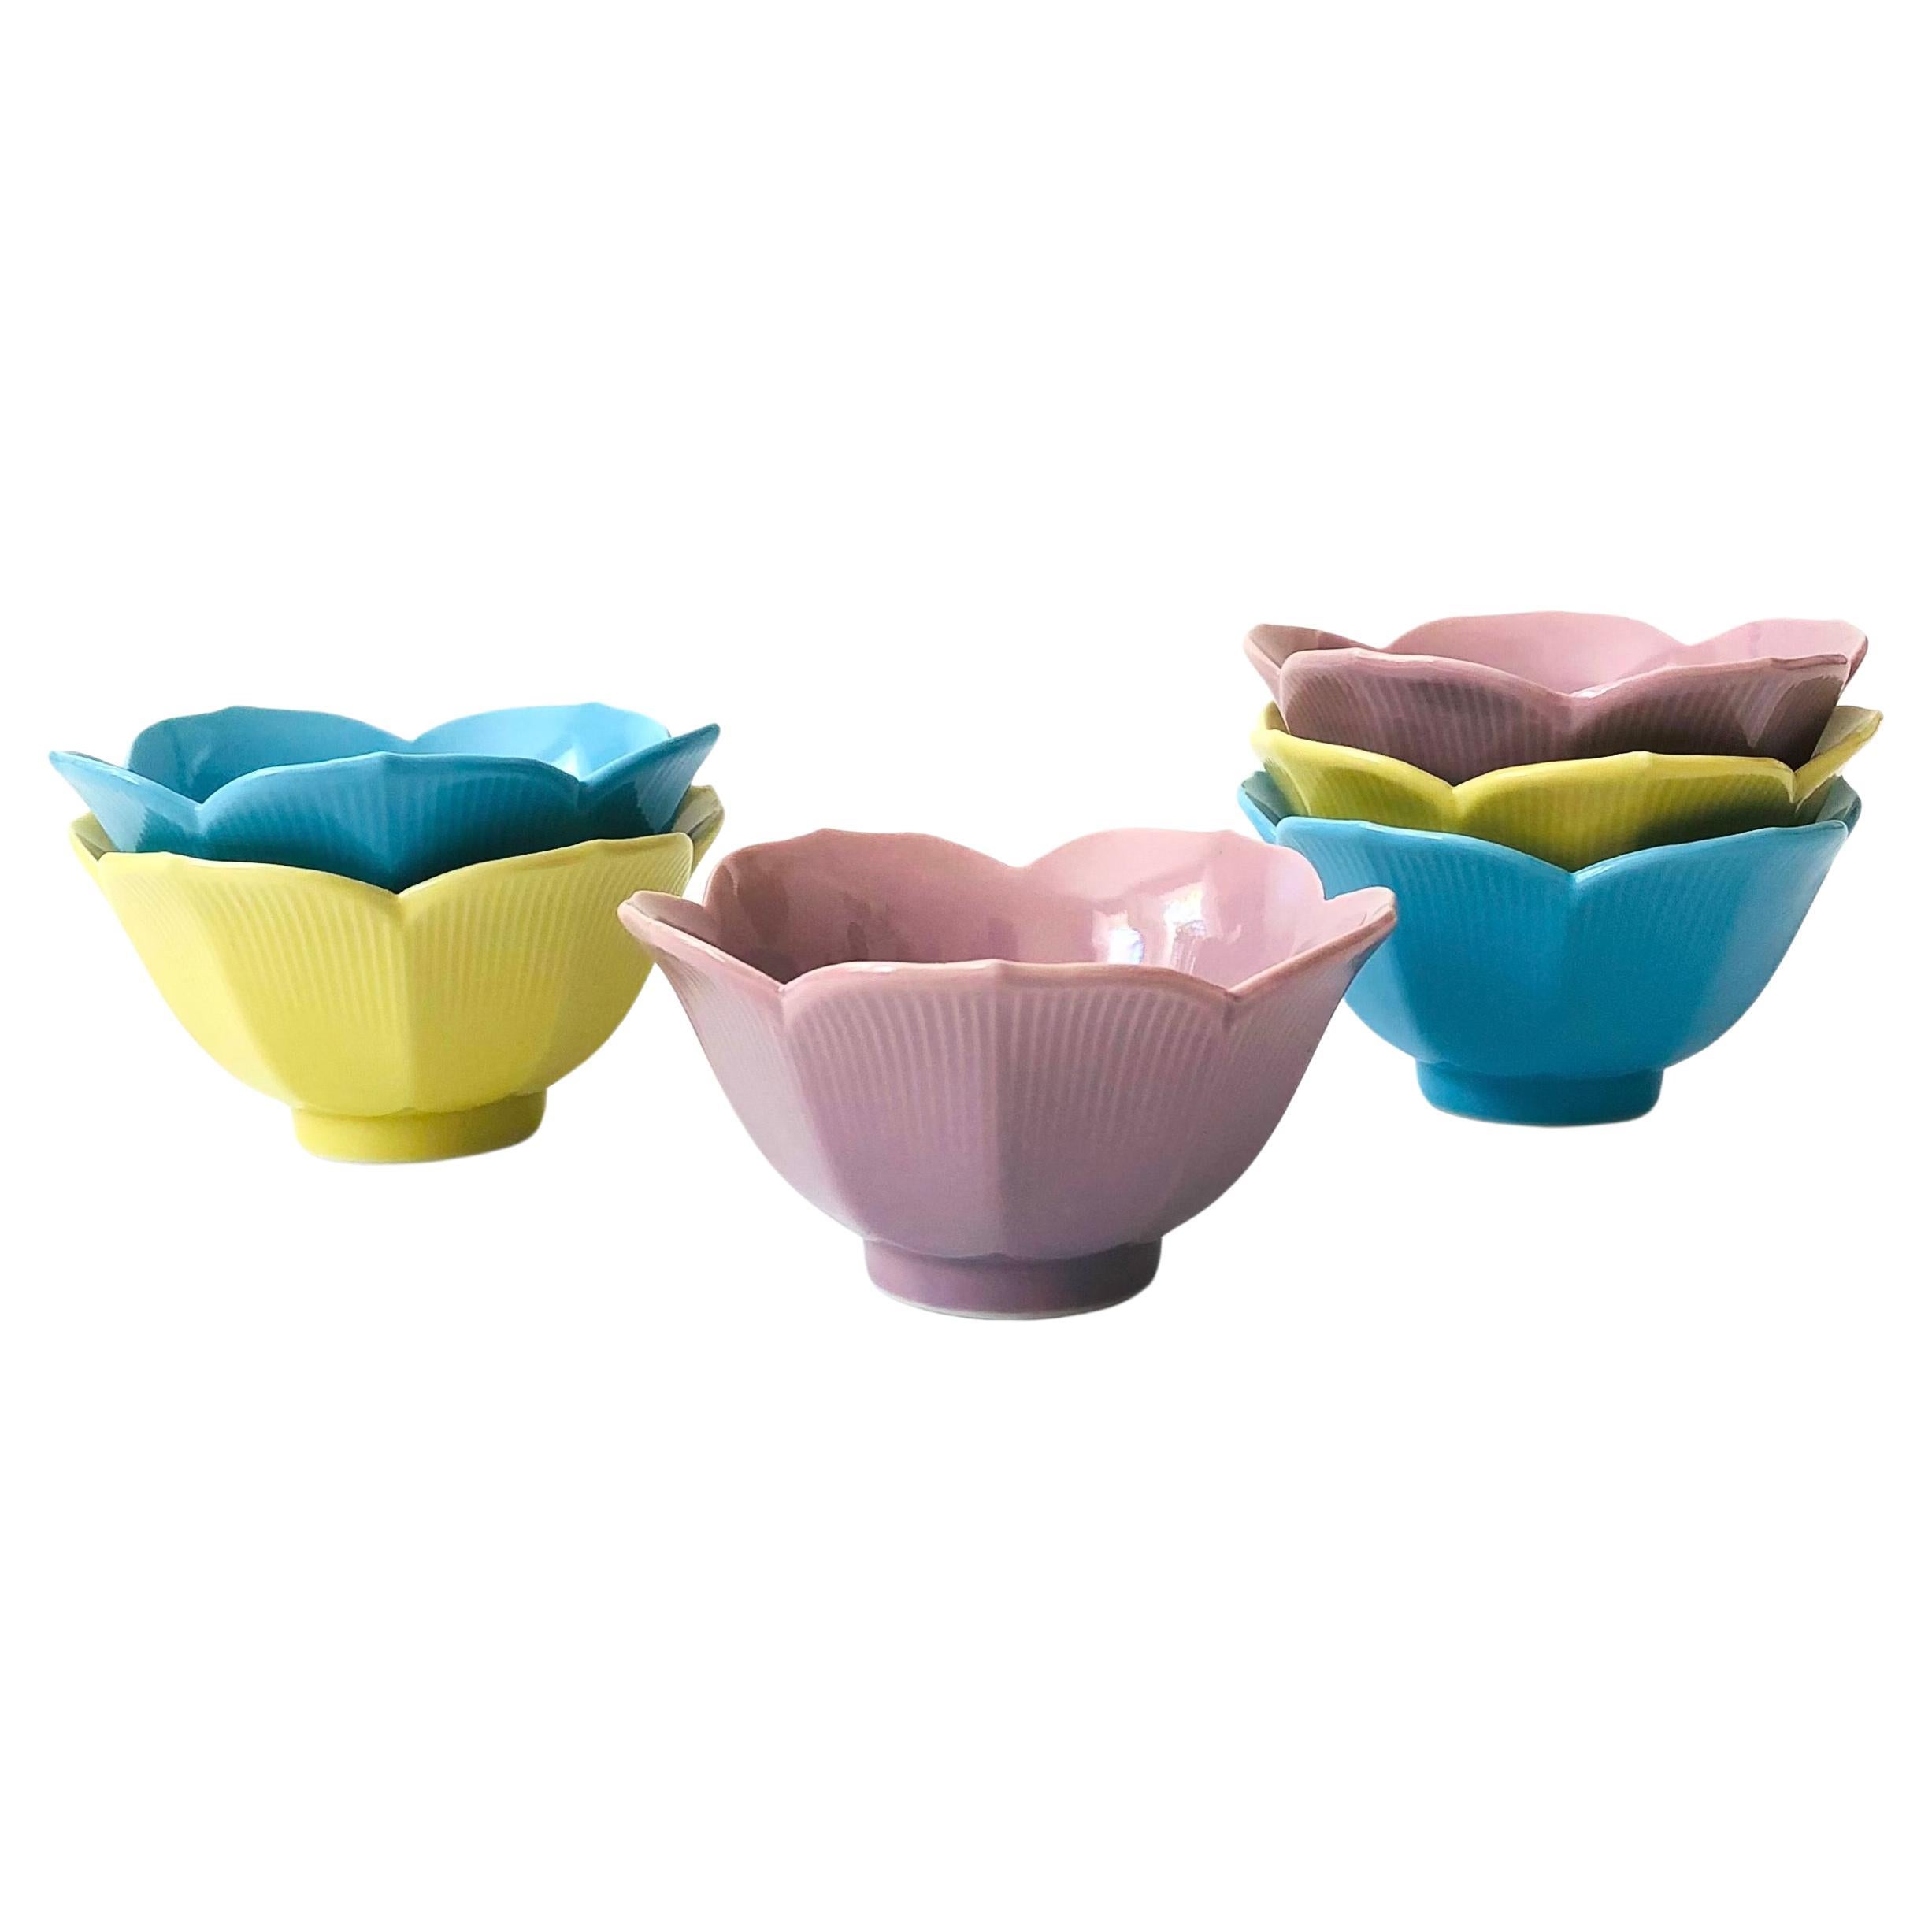 Colorful Lotus Bowls - Set of 6 For Sale